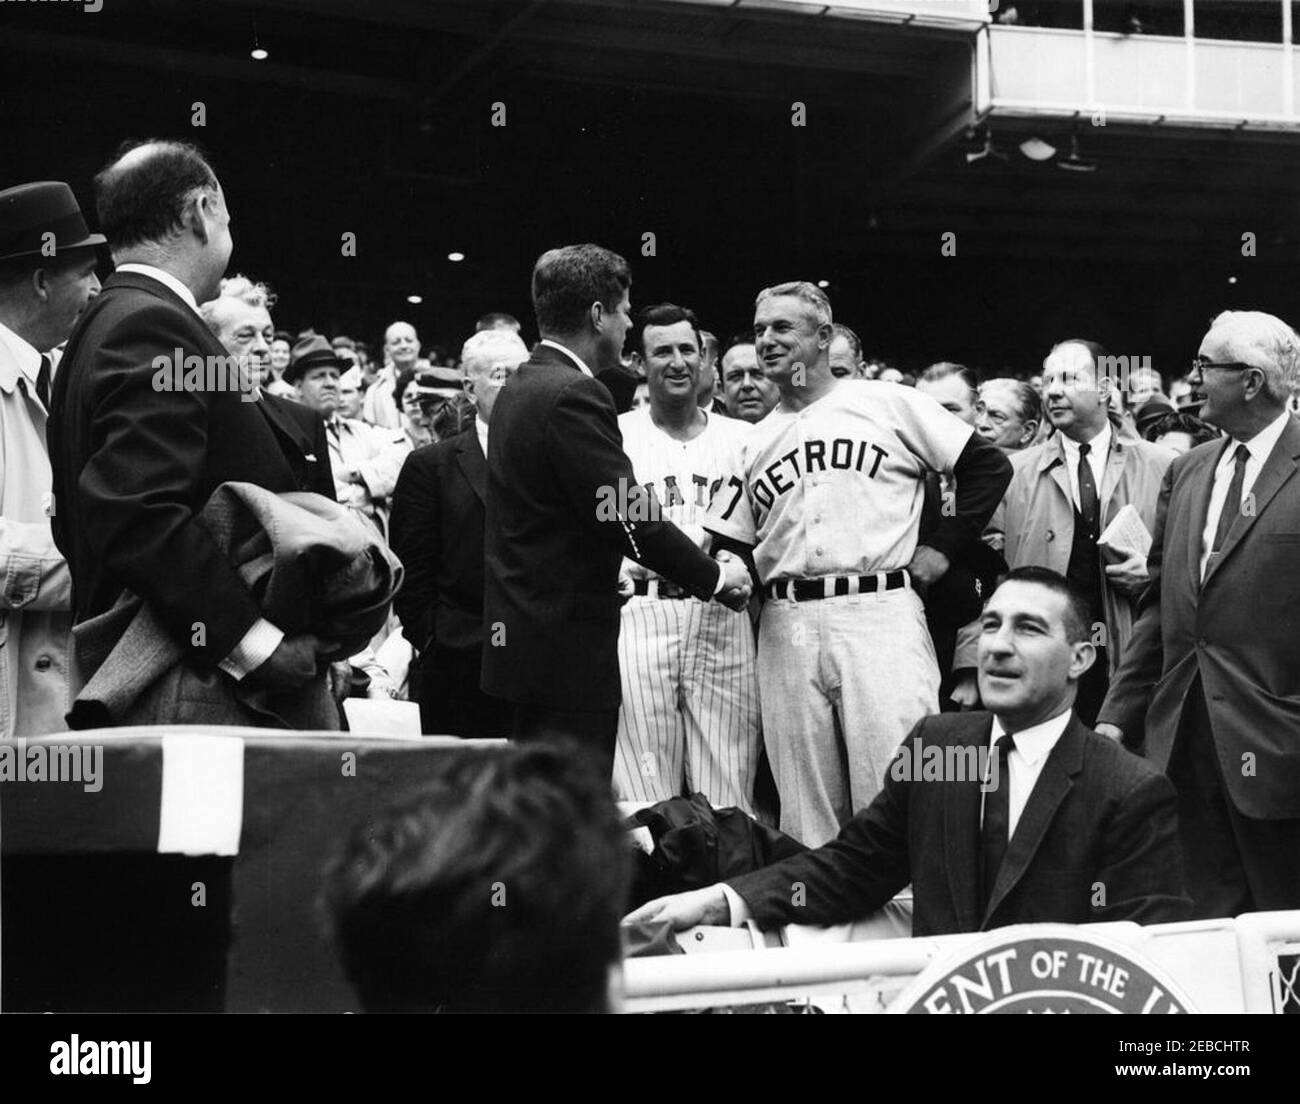 Opening Day at D.C. Stadium, 1962 Baseball Season, 2:00PM. President John F. Kennedy shakes hands with Bob Scheffing, Manager of the Detroit Tigers, during the first game of the 1962 baseball season. James Barton u201cMickeyu201d Vernon, Manager of the Washington Senators, looks on between the two. Others include: Special Assistant to the President Dave Powers; Secretary of the Treasury C. Douglas Dillon; Senator Everett Dirksen of Illinois; Secretary of the Interior Stewart Udall. D.C. Stadium, Washington, D.C. Stock Photo